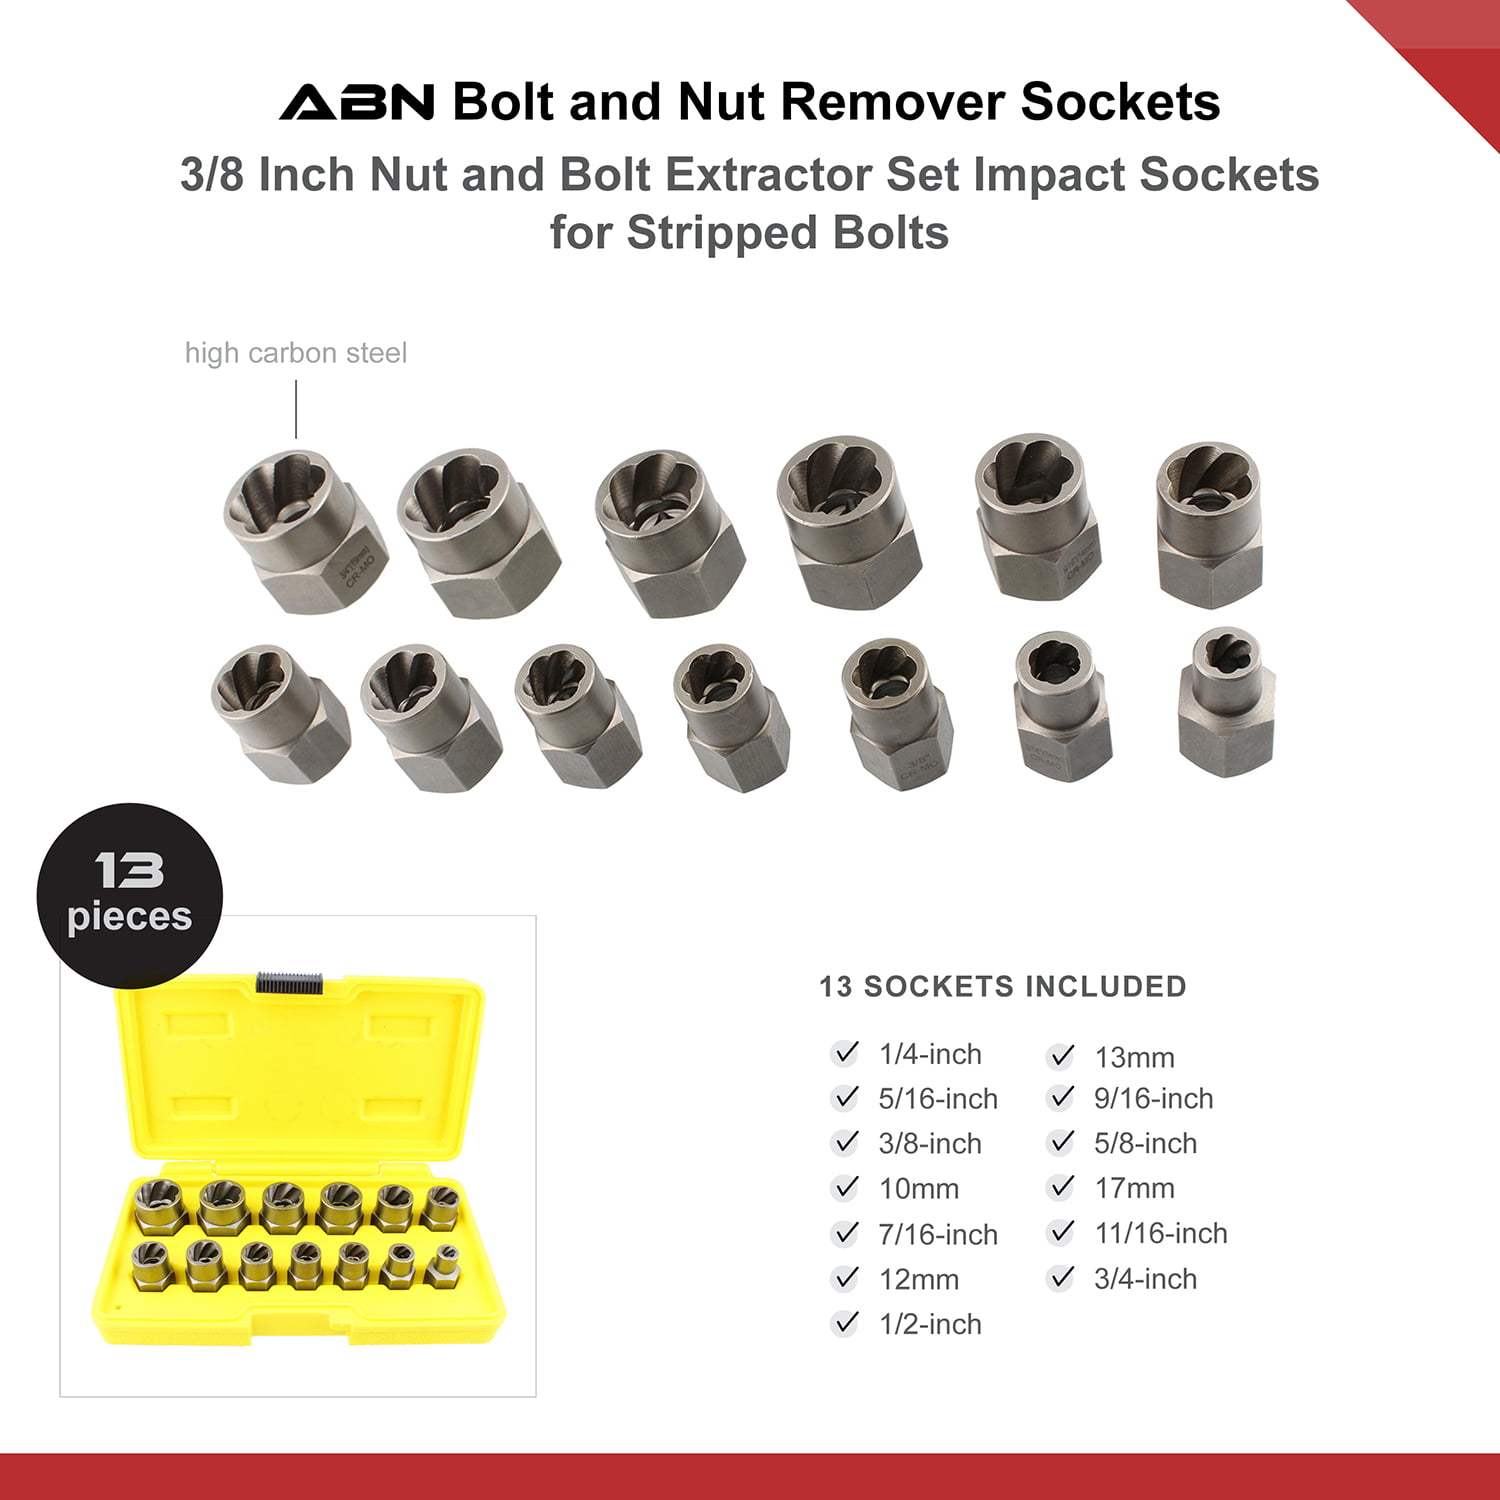 Rusted Damaged Stripped Nut and Bolt Remover Tool Kit Nut Bolt Extractor Socket Set in 13 SAE and Metric Sizes for 3/8 Inch Drive with Case Impact Nut and Bolt Extraction Tool Set 